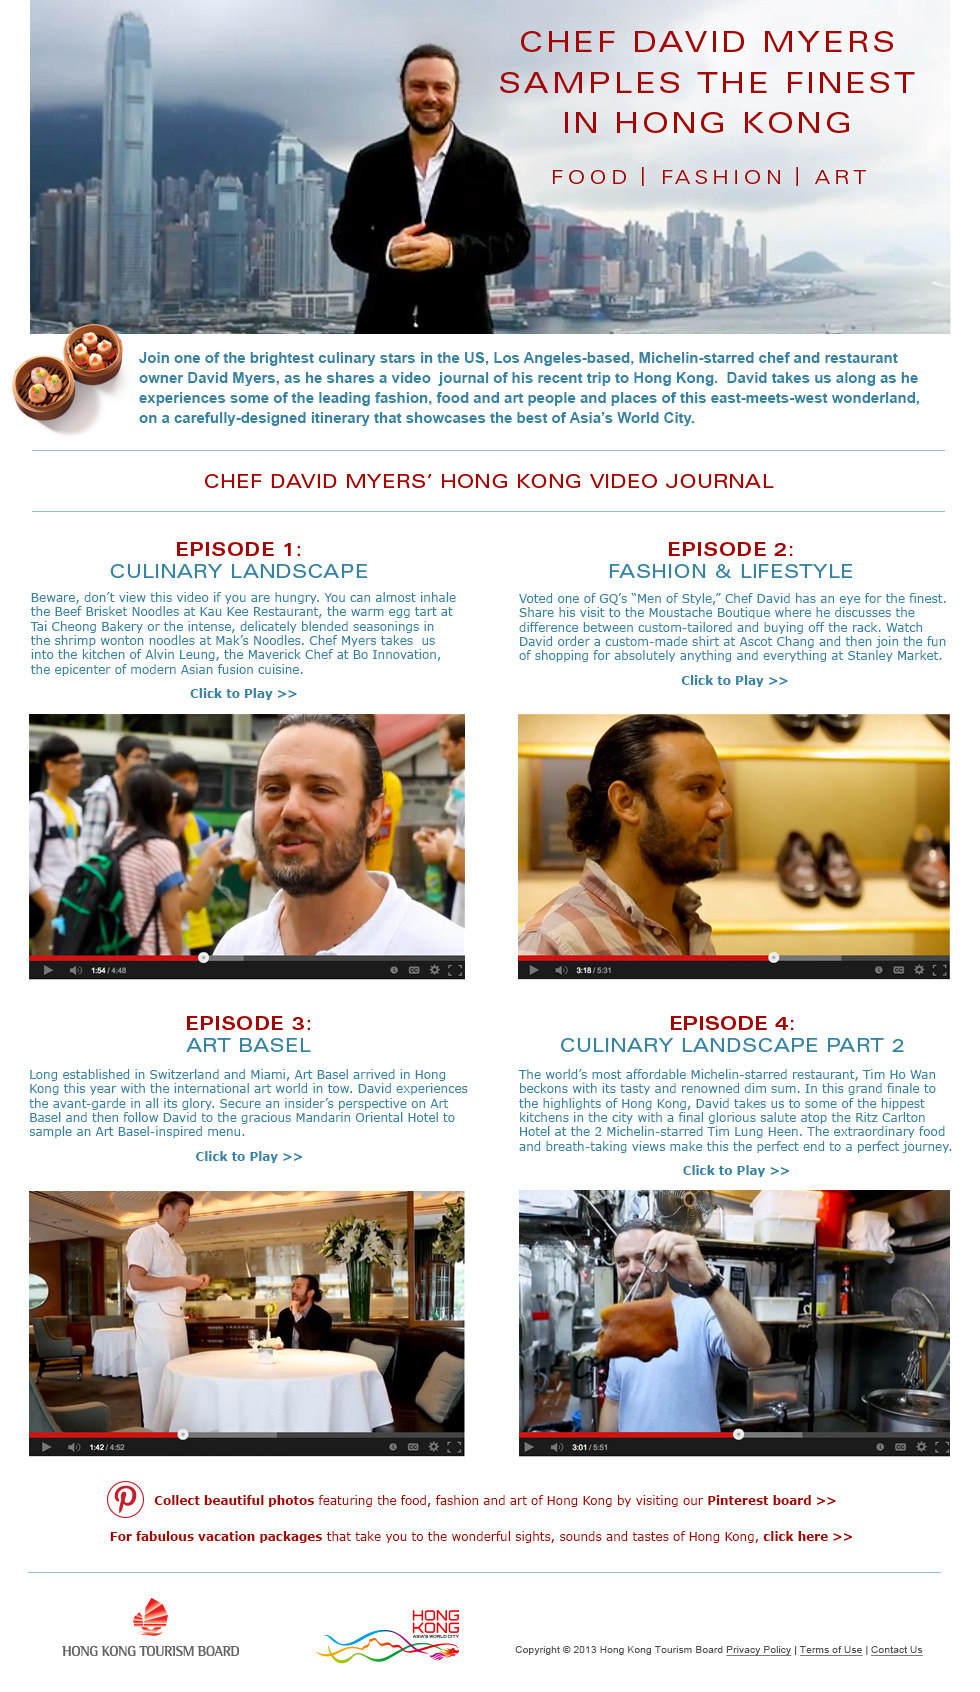 Hong Kong Tourism Board landing page featuring multiple Chef David Myers videos